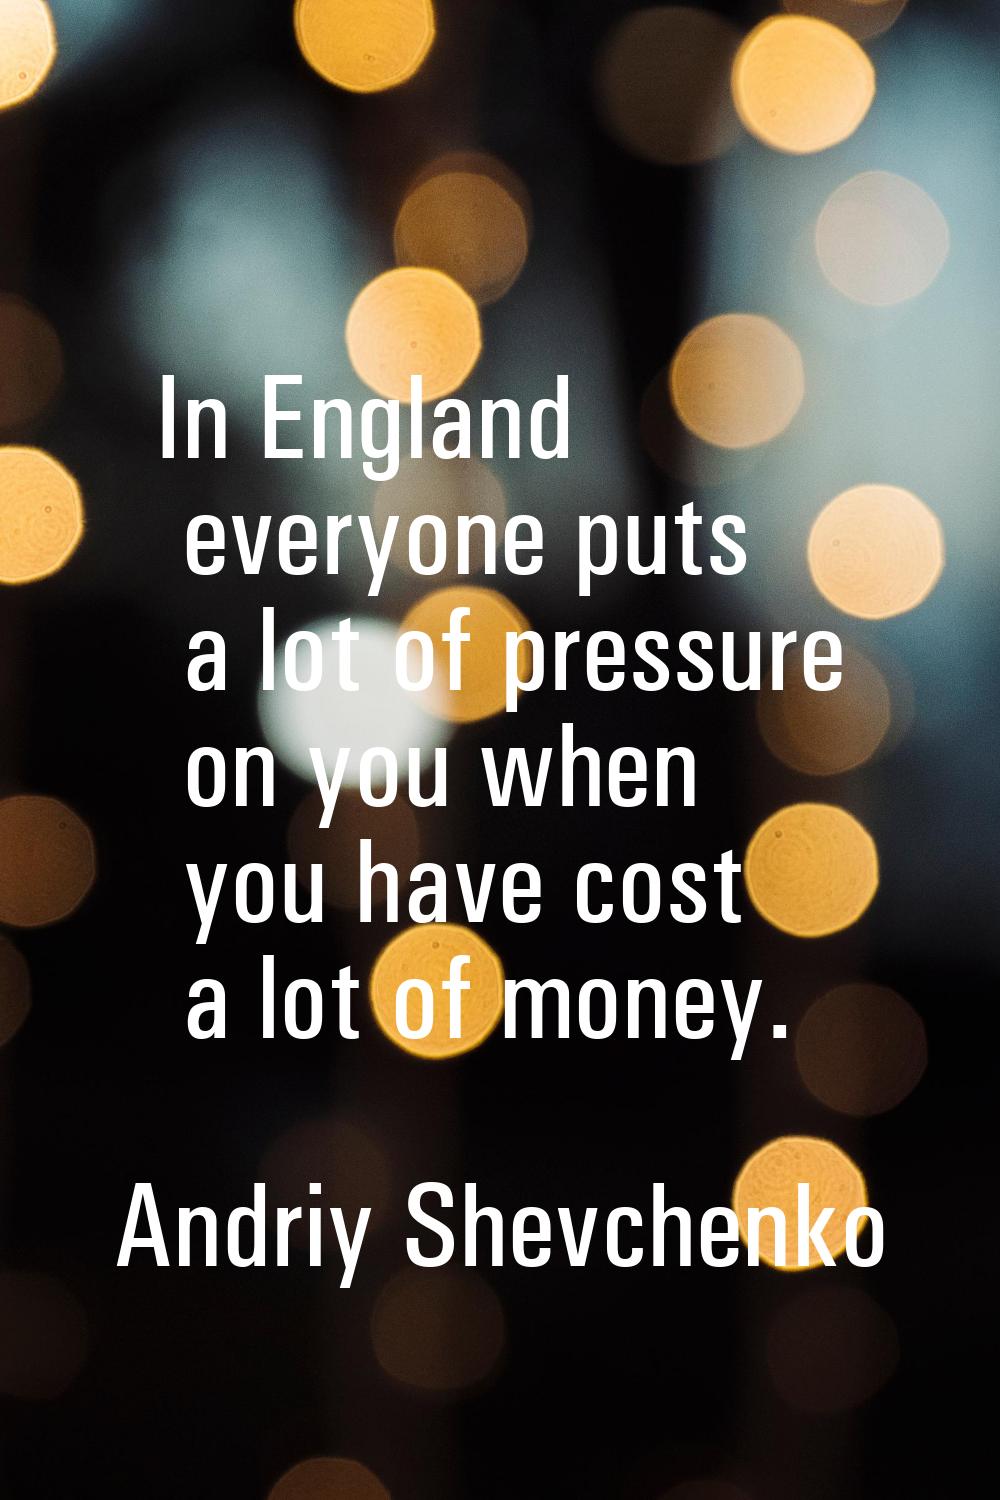 In England everyone puts a lot of pressure on you when you have cost a lot of money.